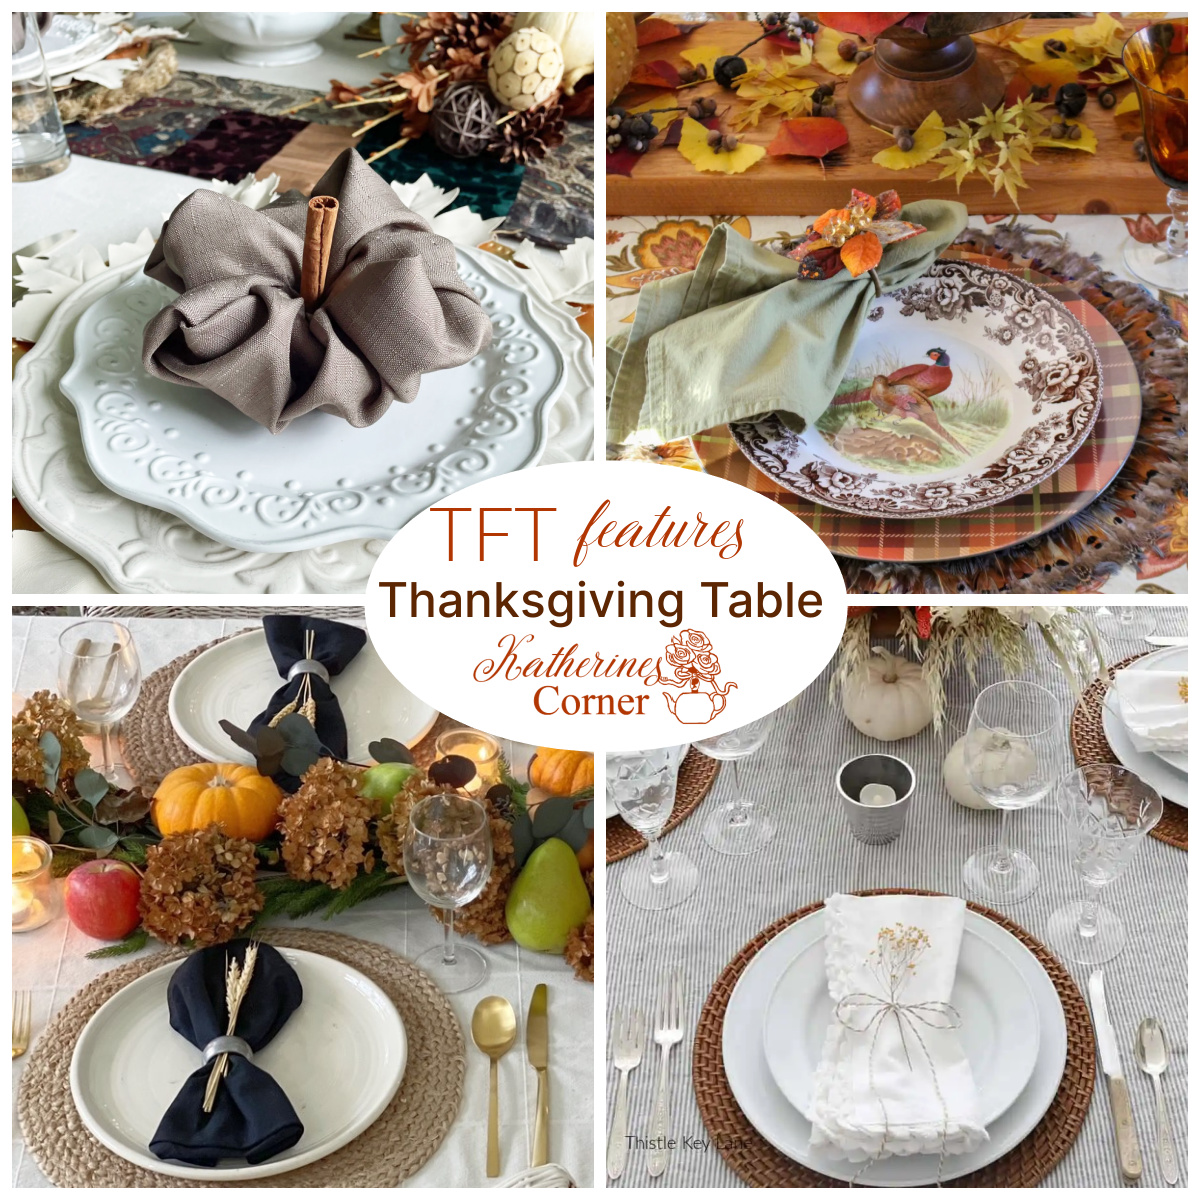 Thanksgiving and TFT Blog Hop